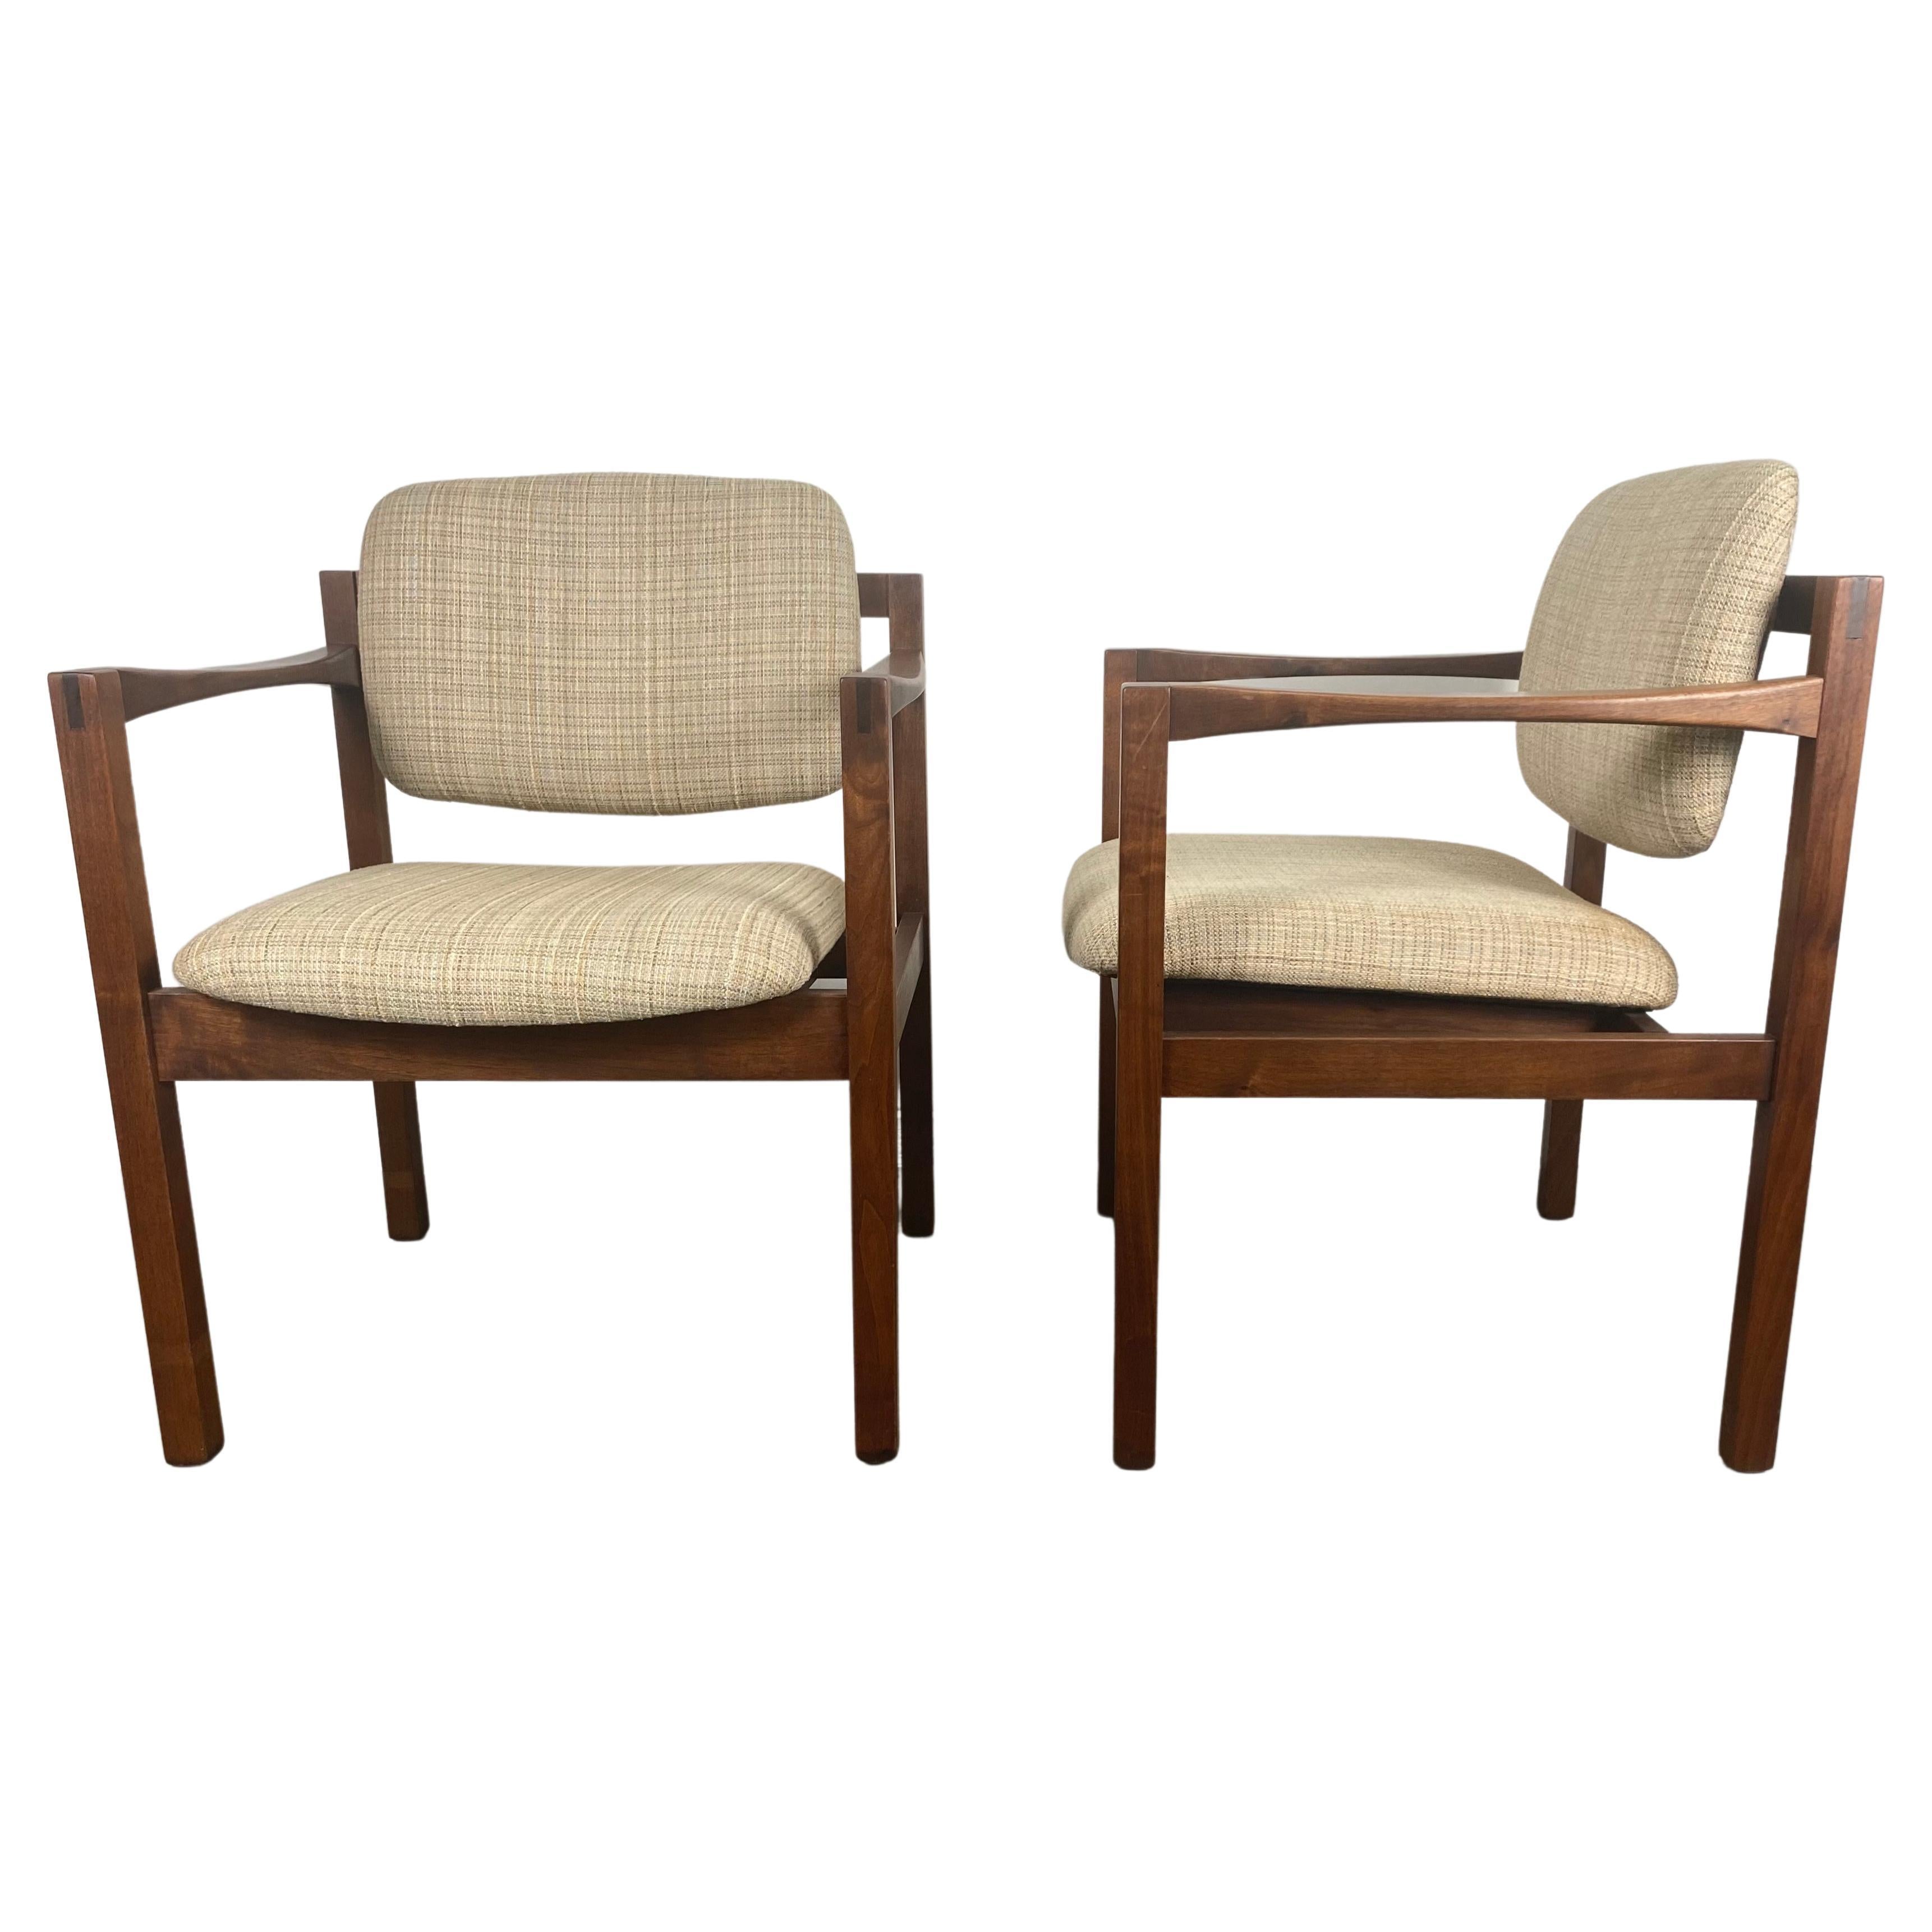 Stunning Pair Modernist Walnut Arm Chairs by Stow Davis /after Jens Risom